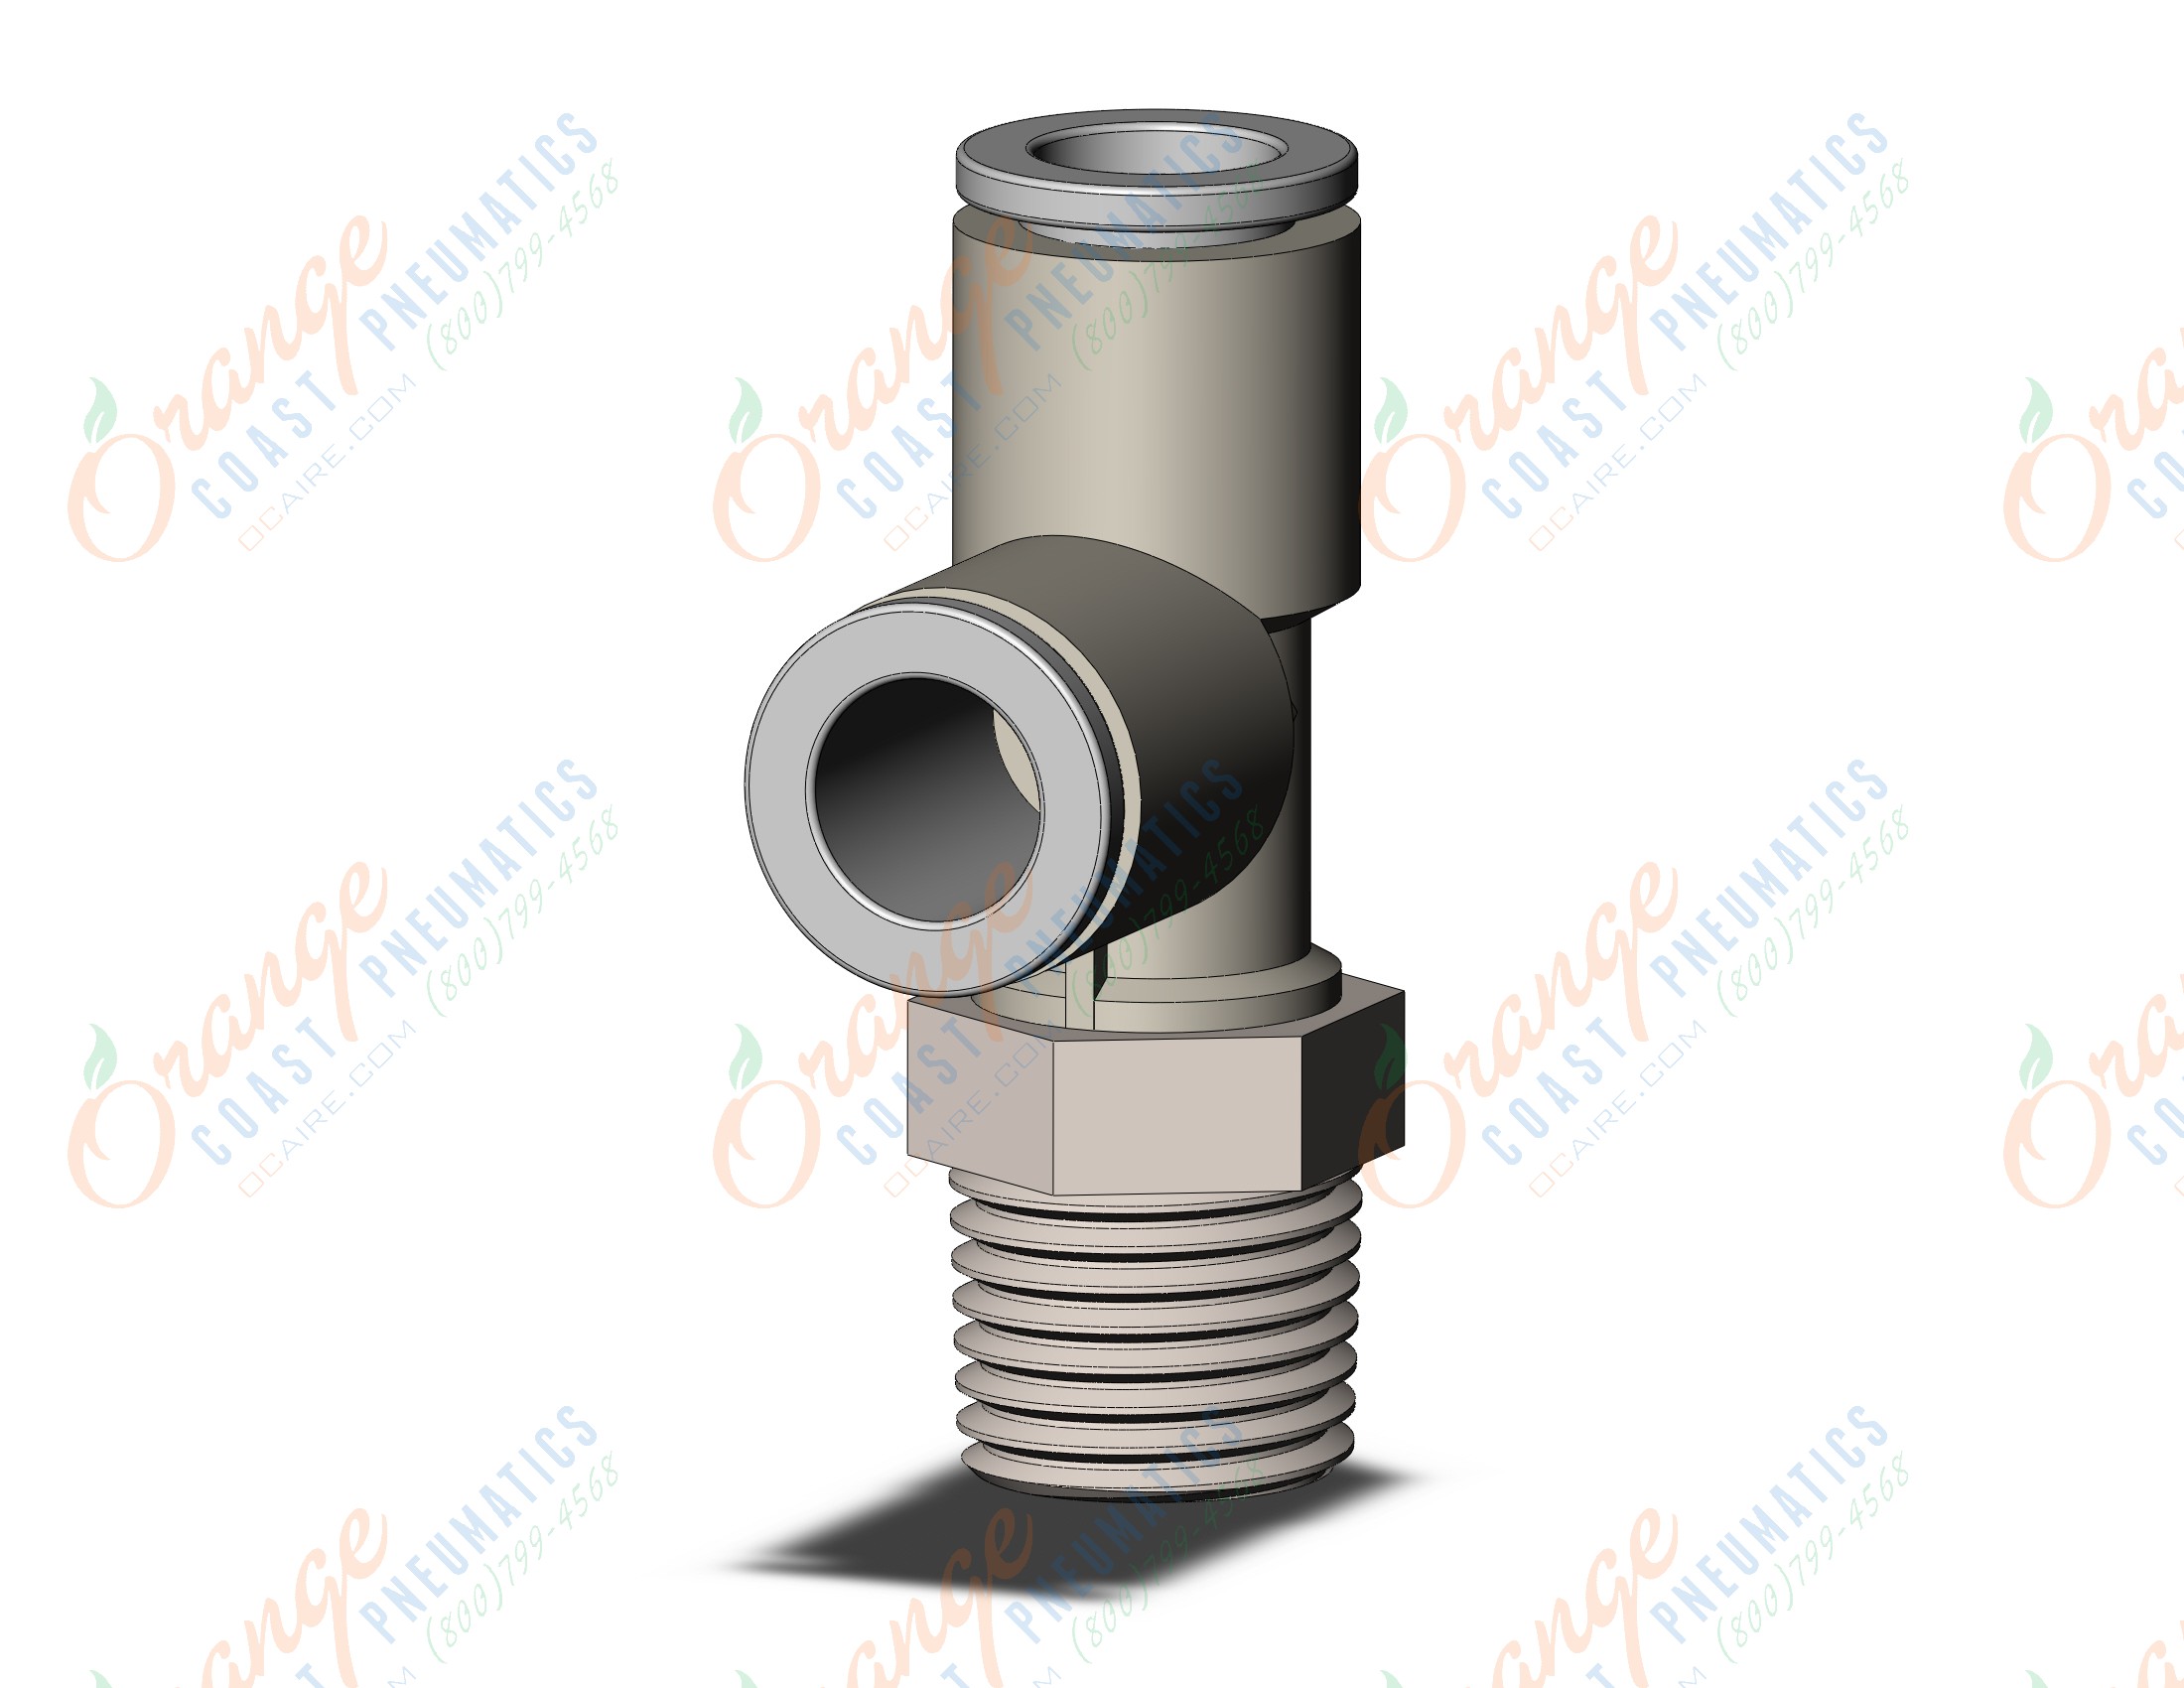 SMC KQ2Y08-02N kq2 8mm, KQ2 FITTING (sold in packages of 10; price is per piece)